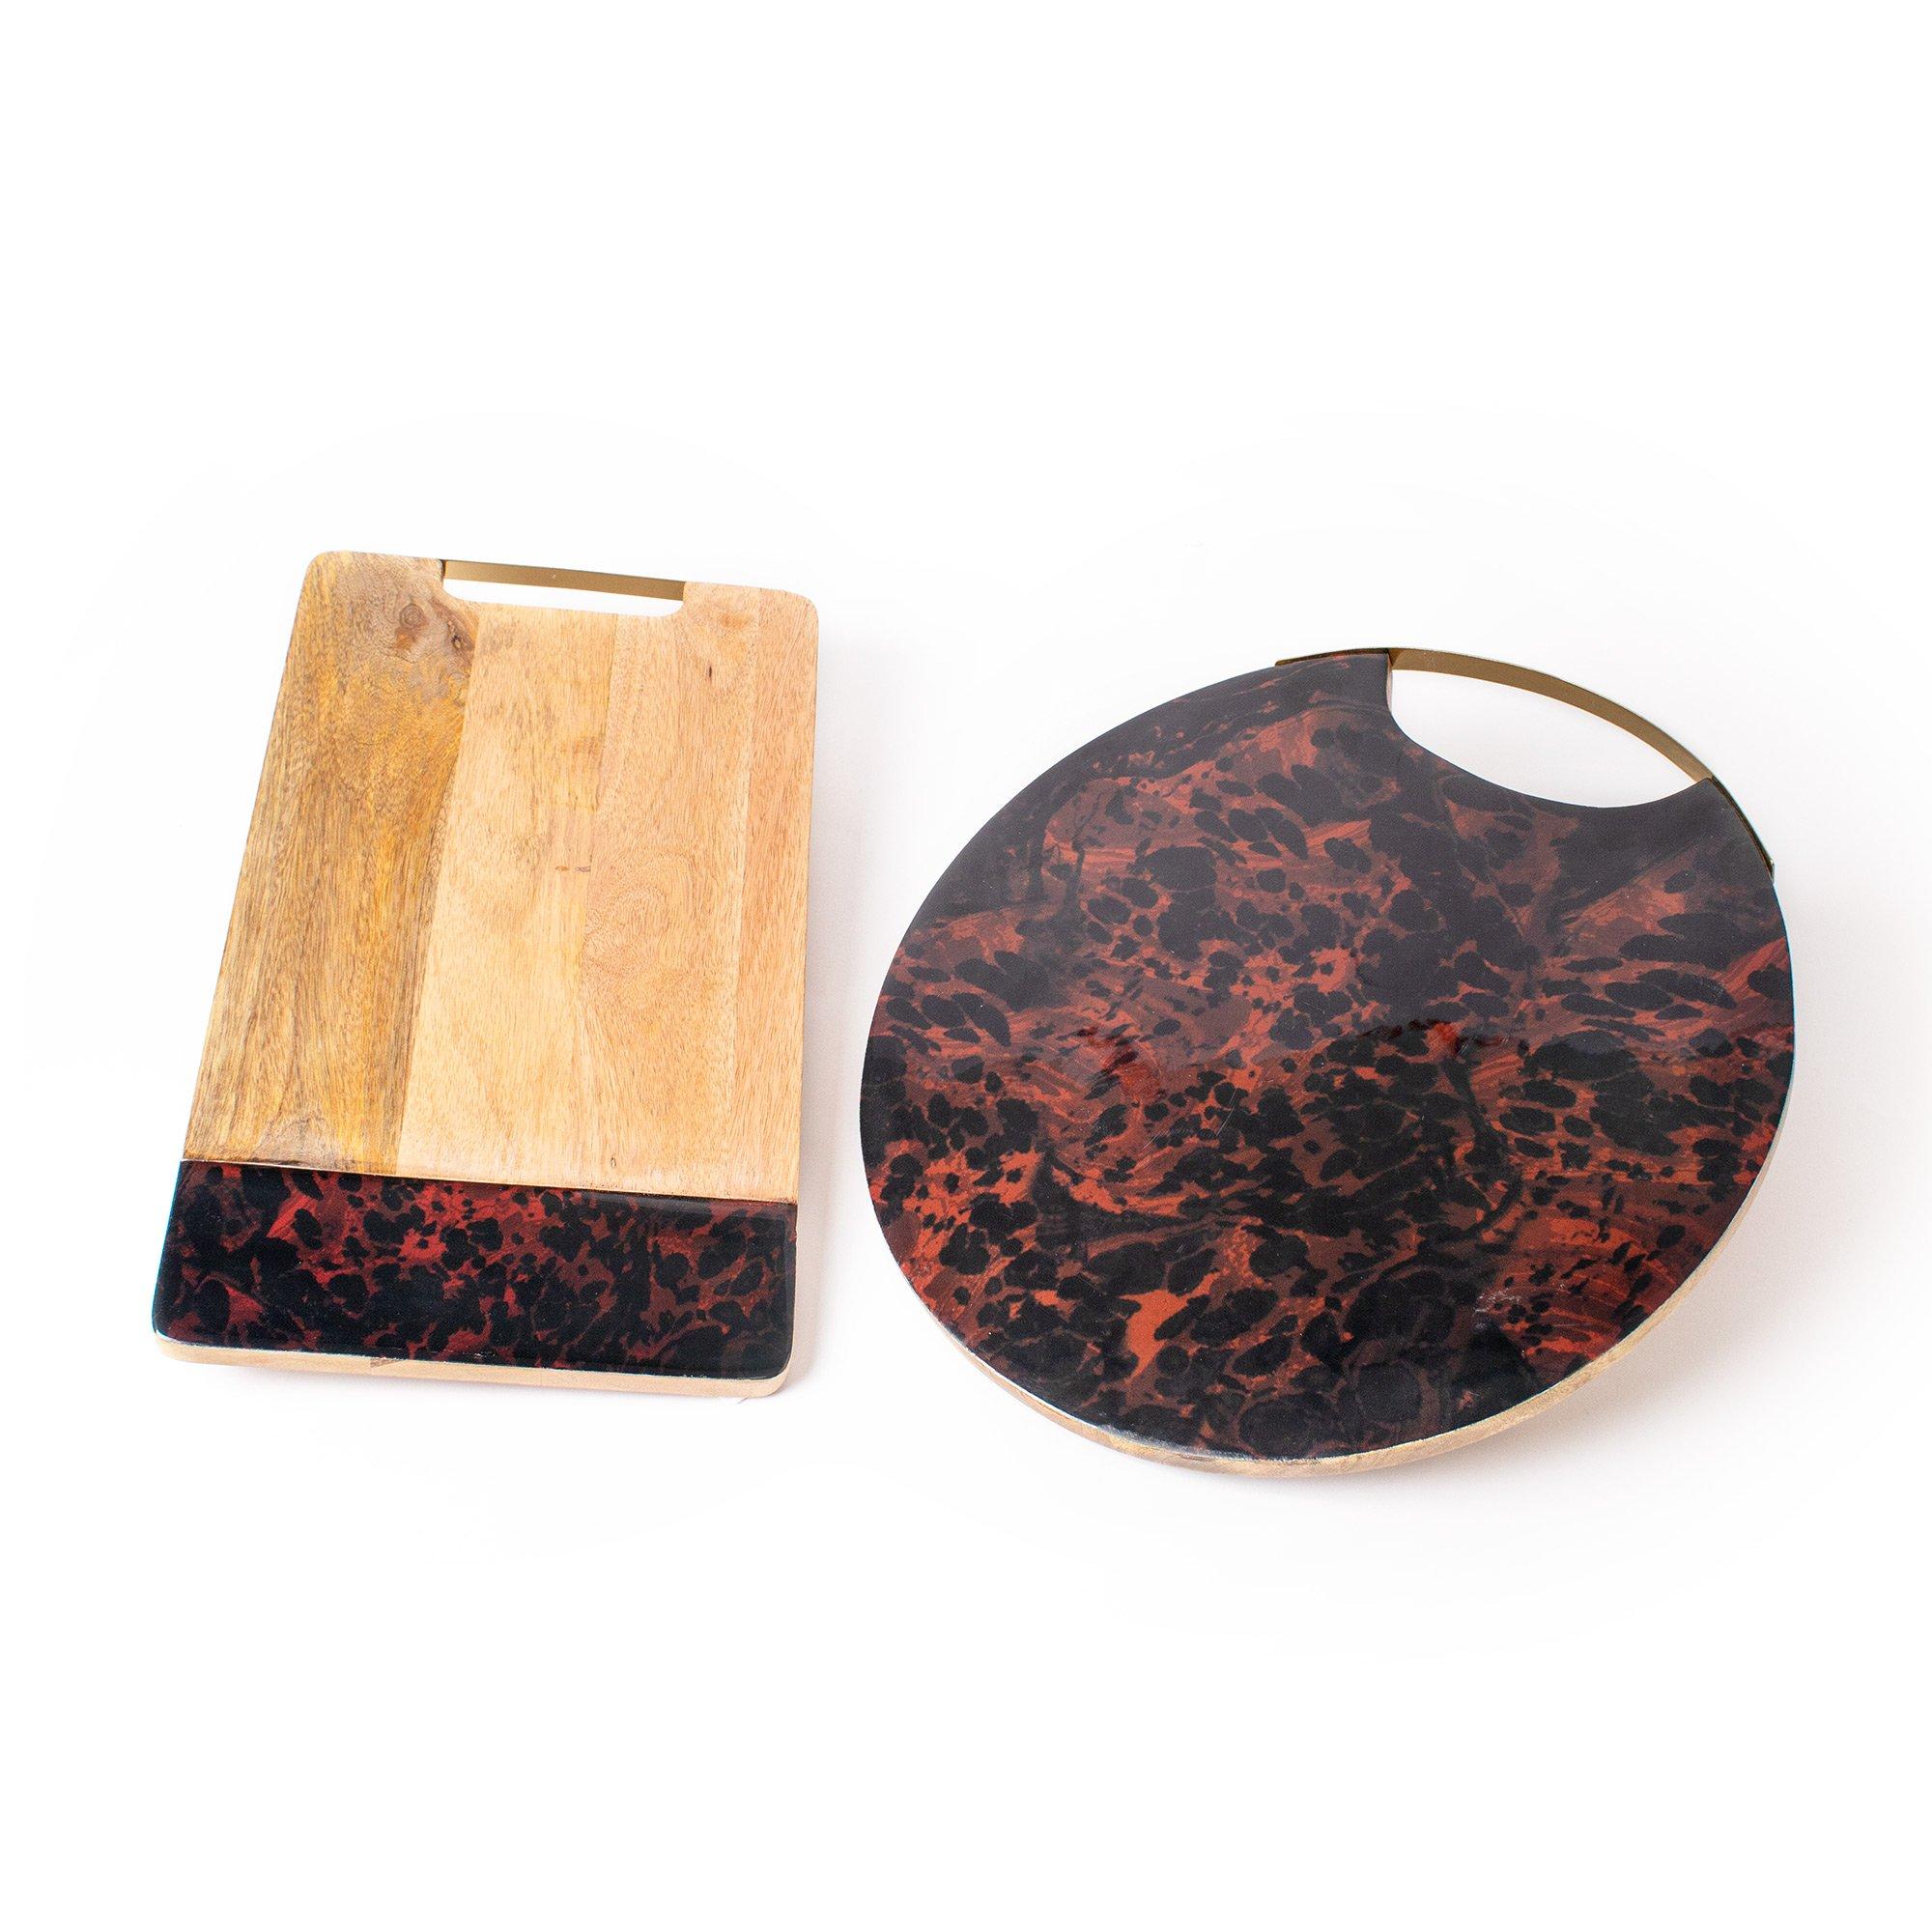 Serving Platter Set with Mango Wood Serving Platters with Tortoise Shell Resin, Round and Rectangula